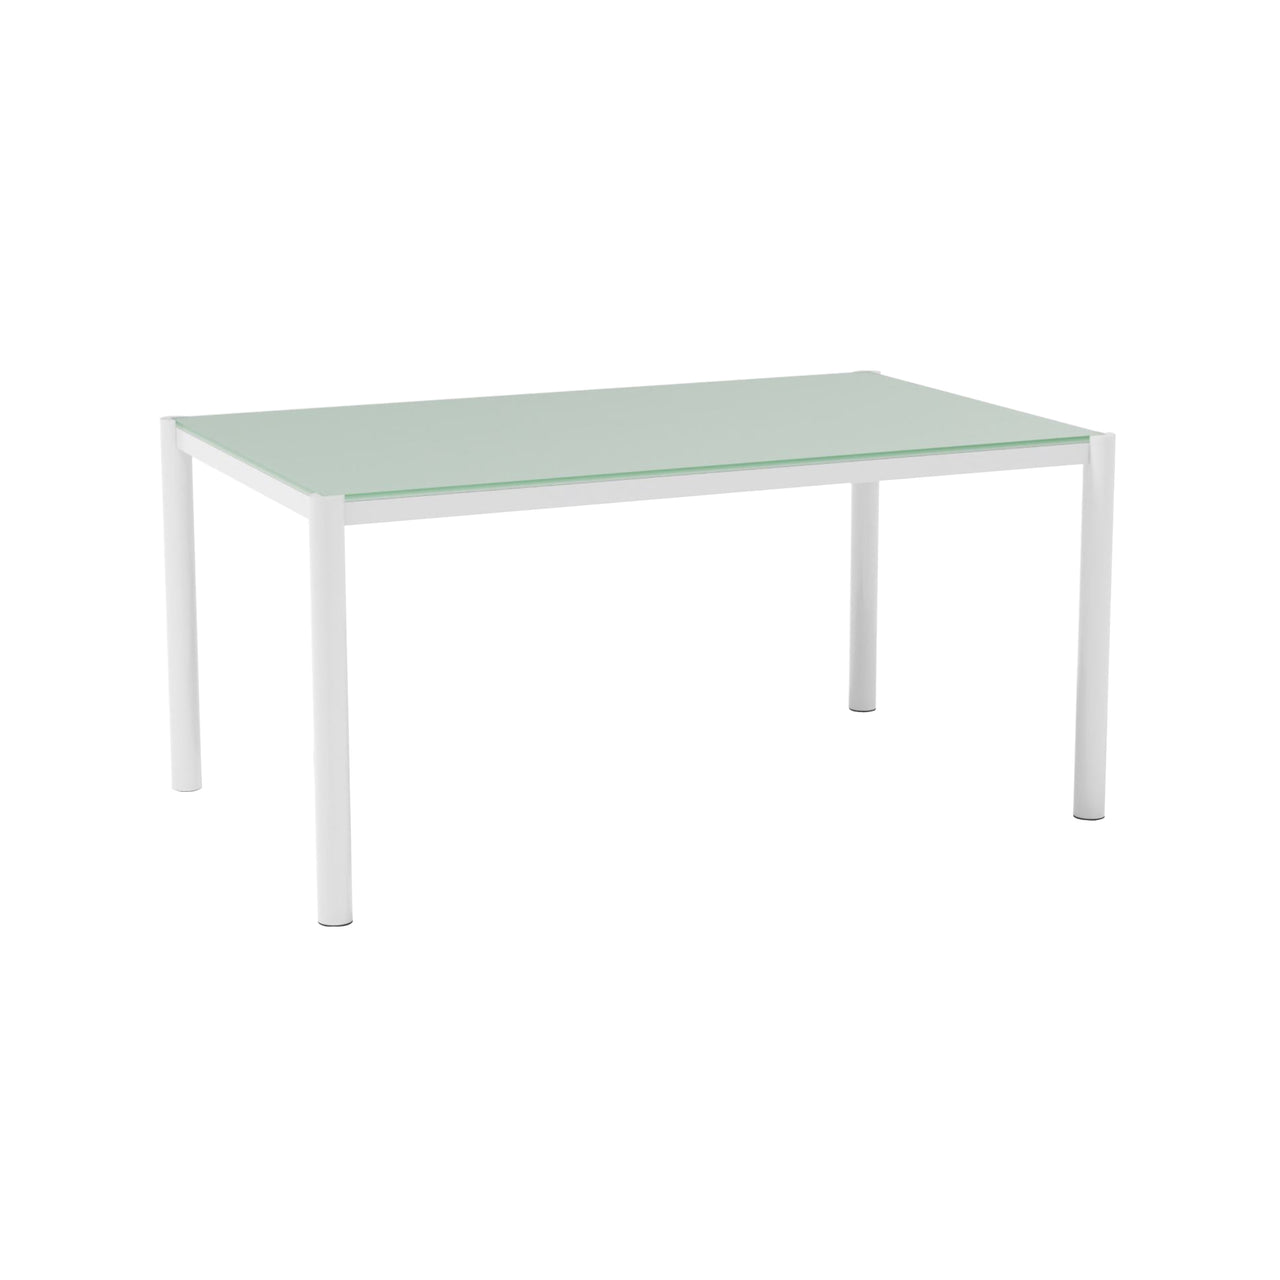 Get-Together Dining Table: Rectangular + Small - 60